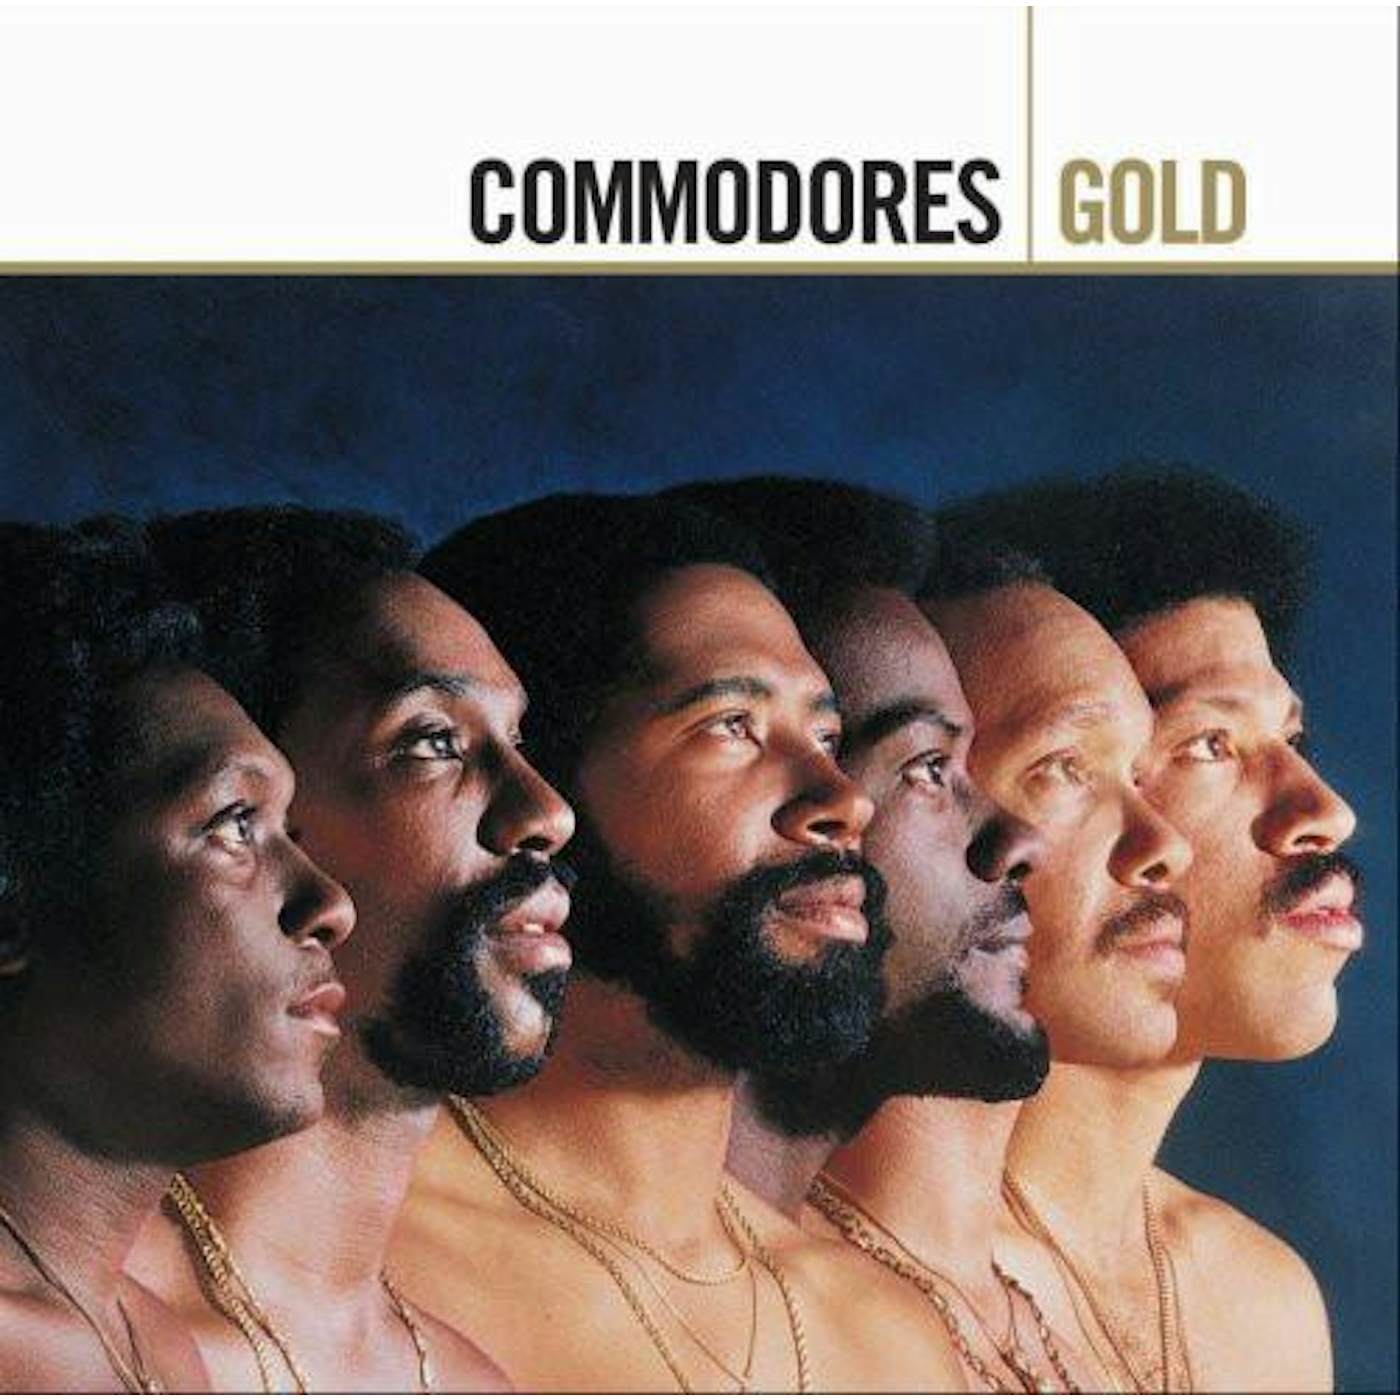 Commodores GOLD CD